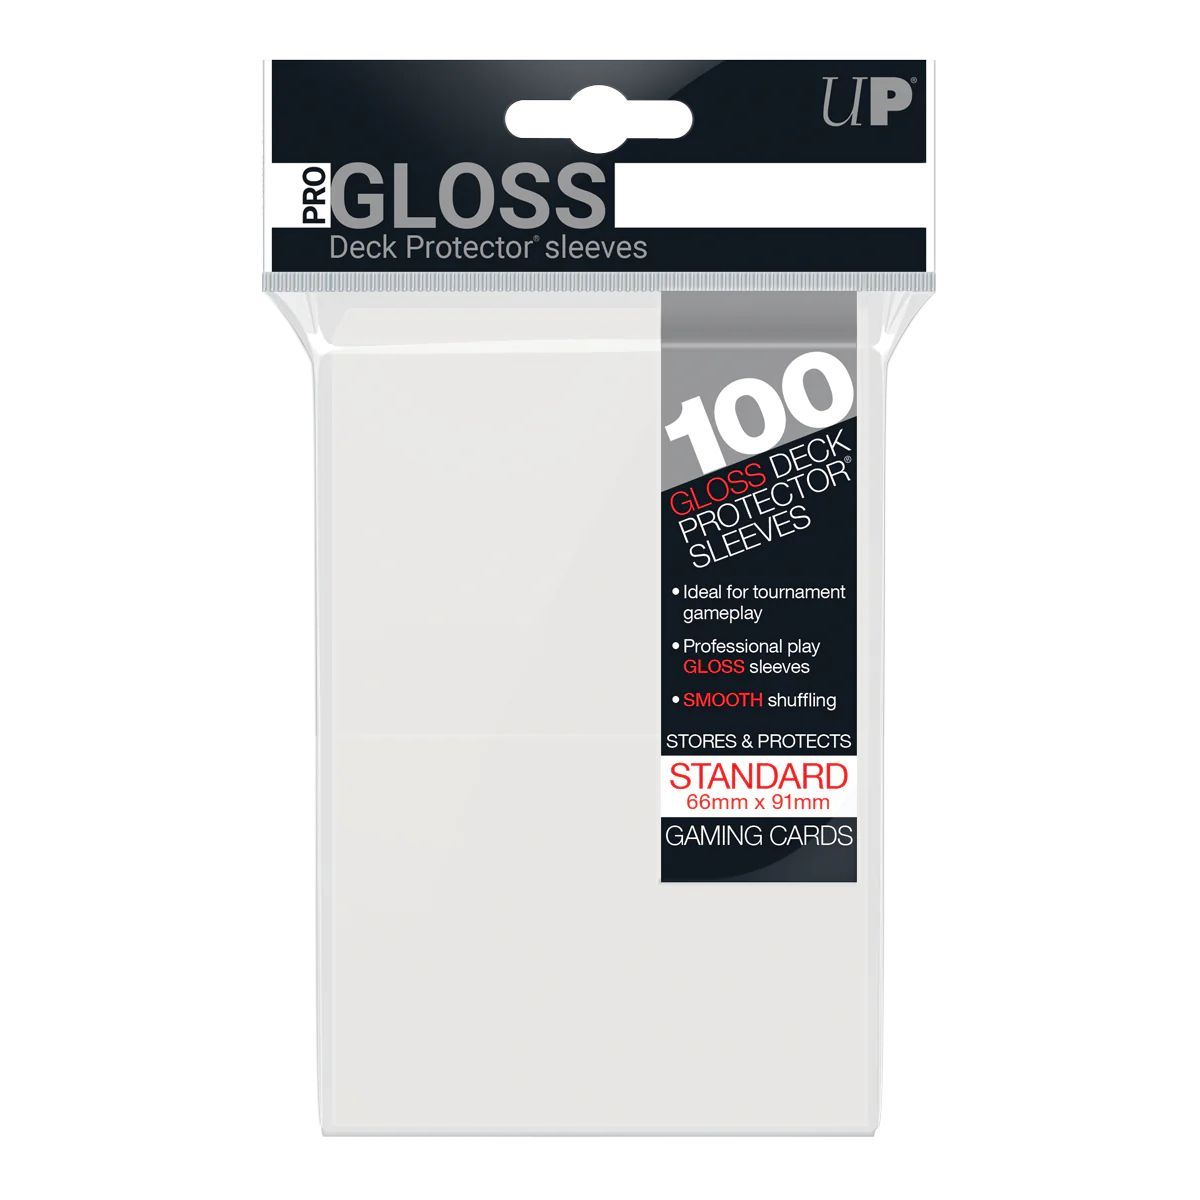 Ultra Pro - Card Sleeves - Standard - Clear - Transparent (1000)